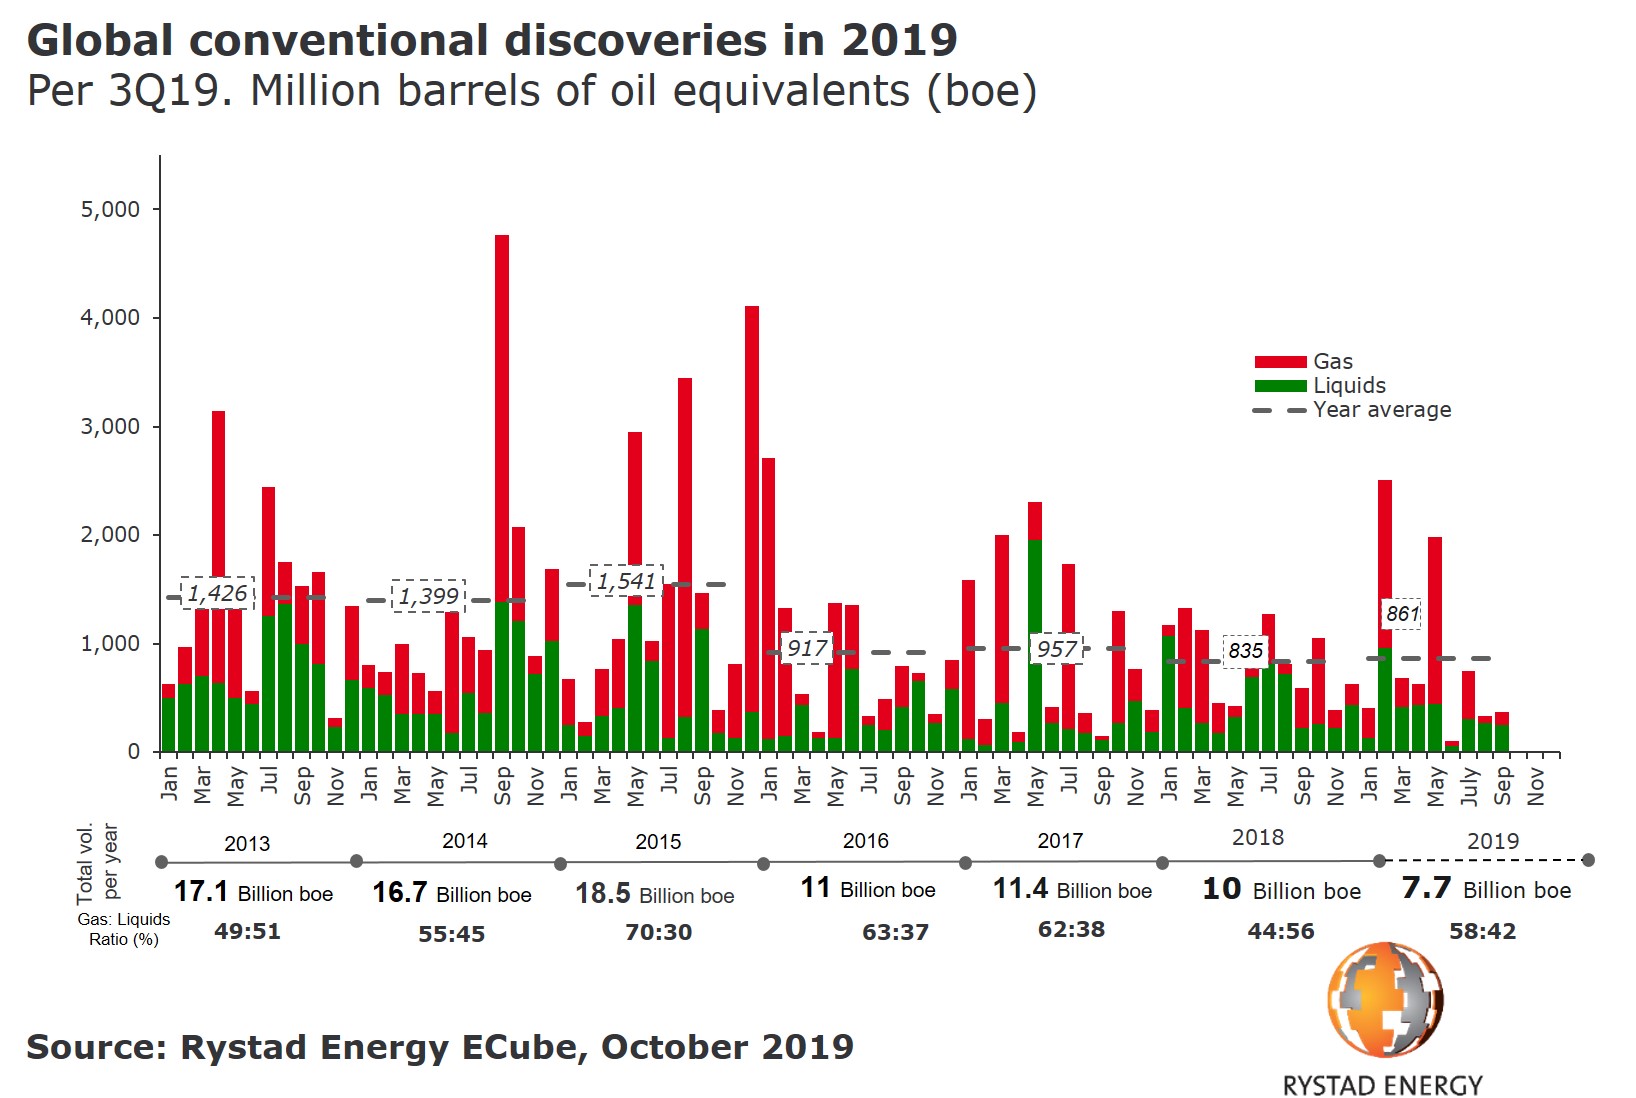 Graph showing global conventional discoveries in 2019